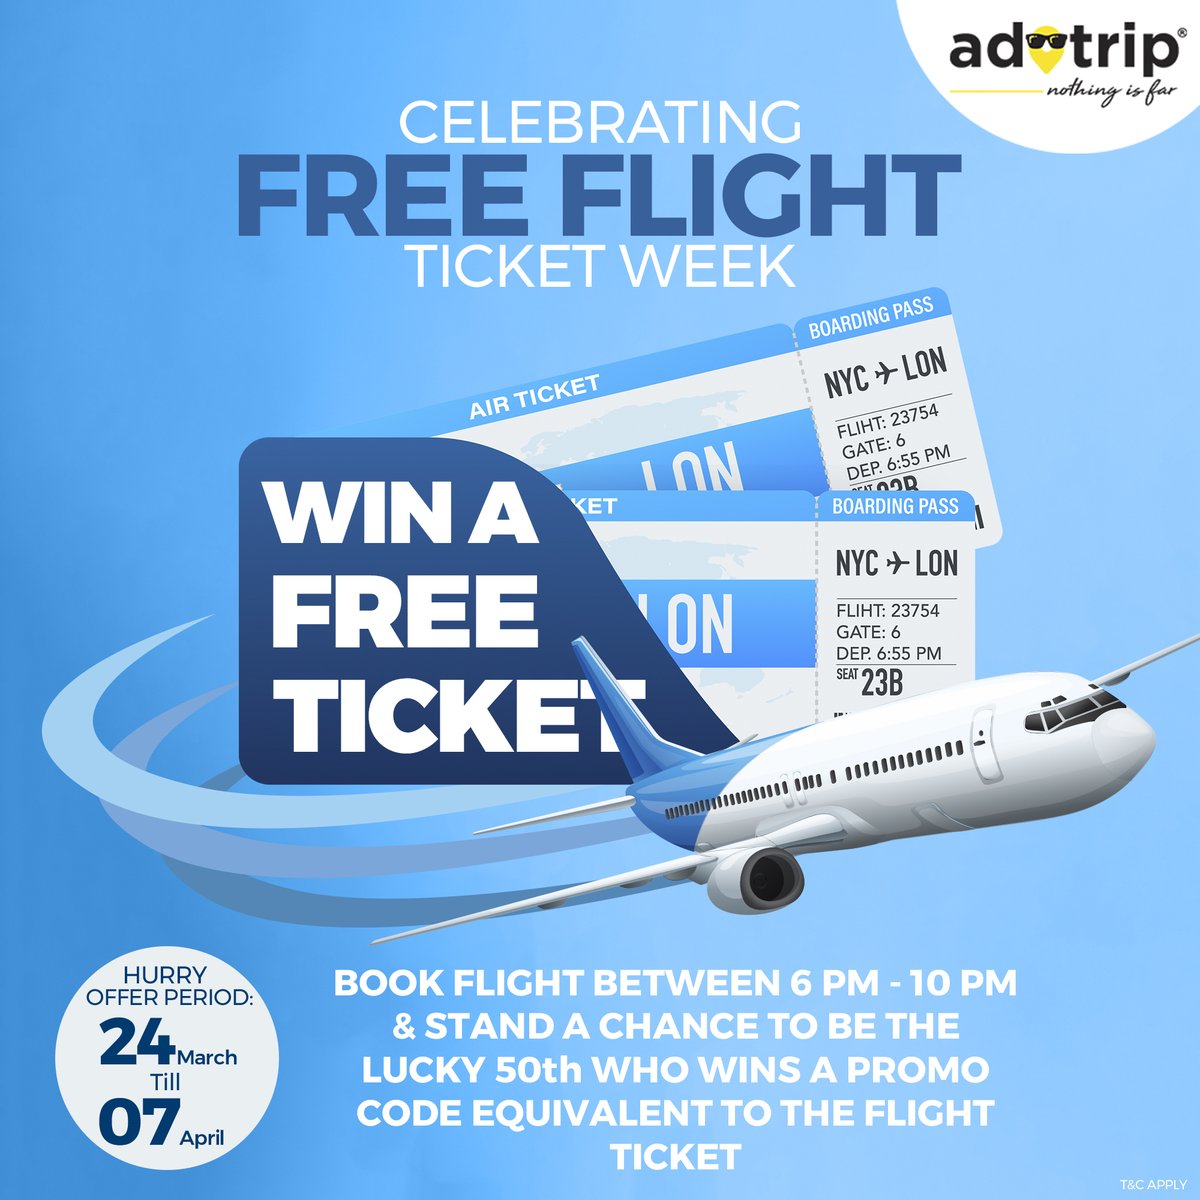 Participate & stand a chance to win a free ticket. Every 50th booking at Adotrip between 24.3.2023 to 7.4.2023 from 6 to 10 PM

BOOK: adotrip.com
.
.
#cheapflights #cheapprice #Cheapest #LowPricesEveryday #lowprices #flight #OfferSale #flightoffers #discounts